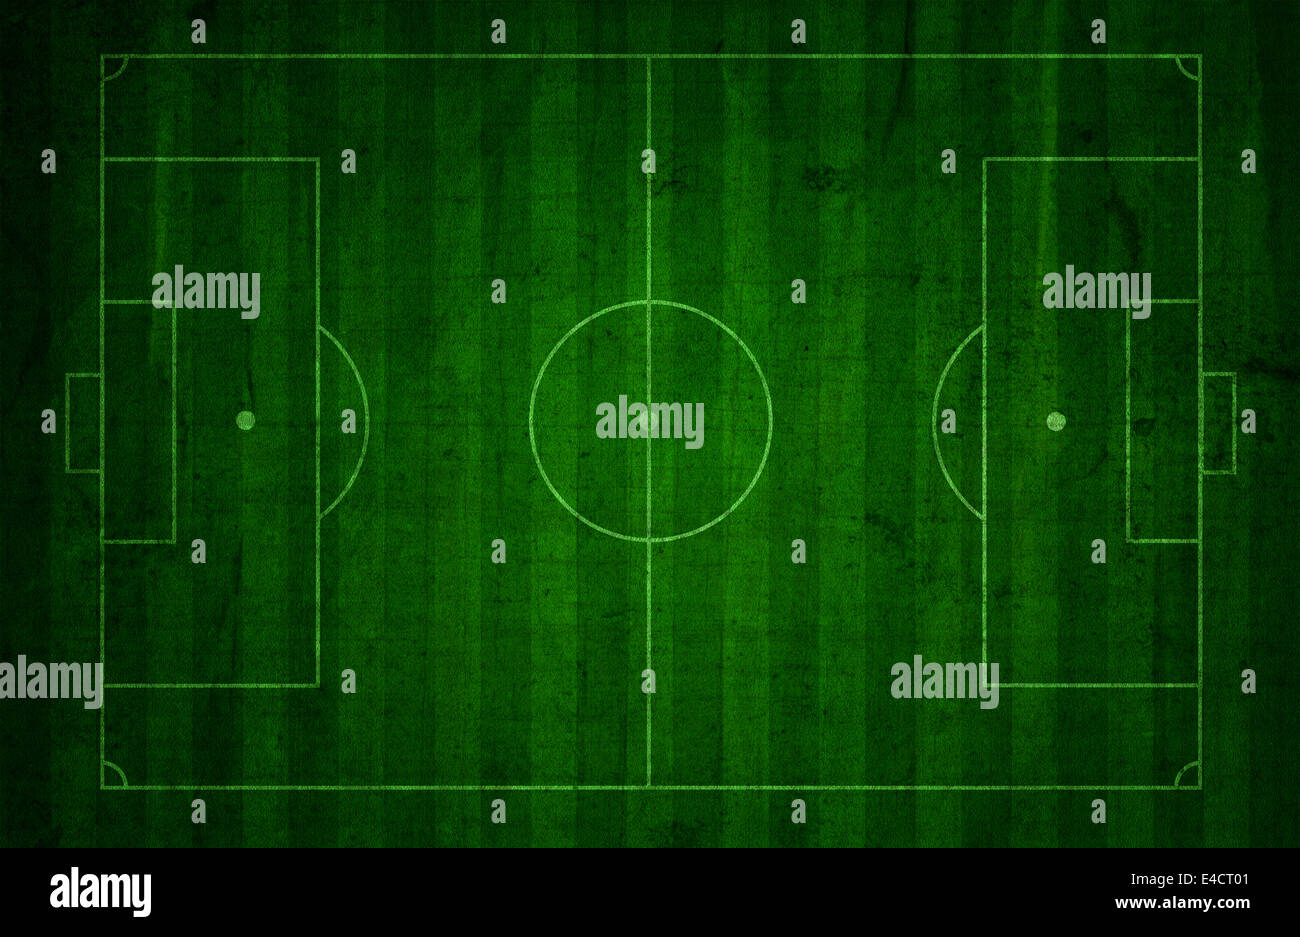 Grunge style background of a football pitch design Stock Photo - Alamy